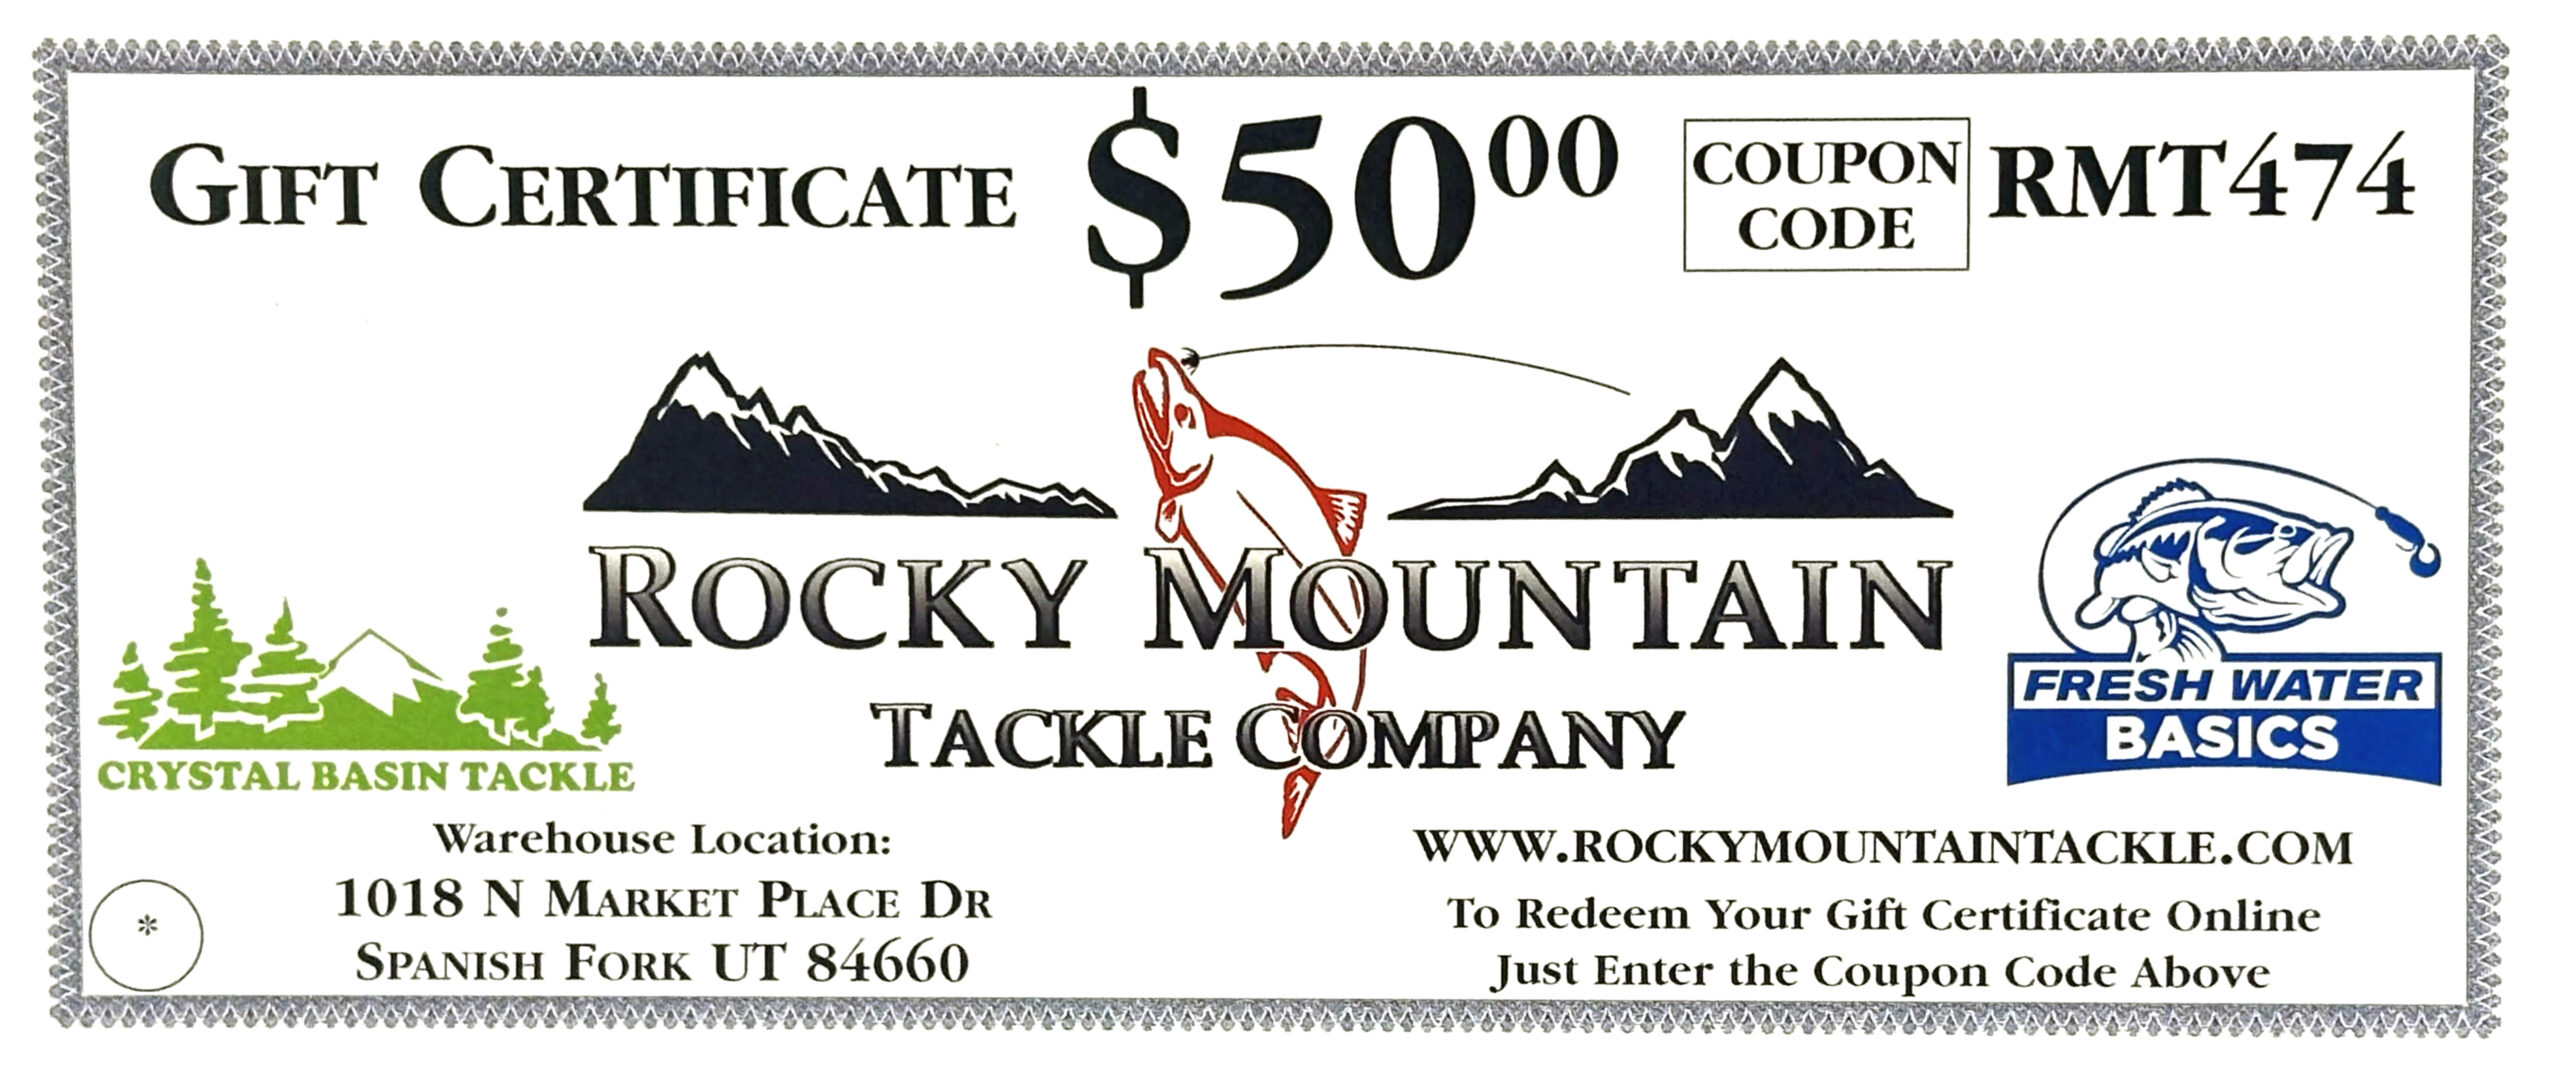 $50 Gift Certificate - Rocky Mountain Tackle